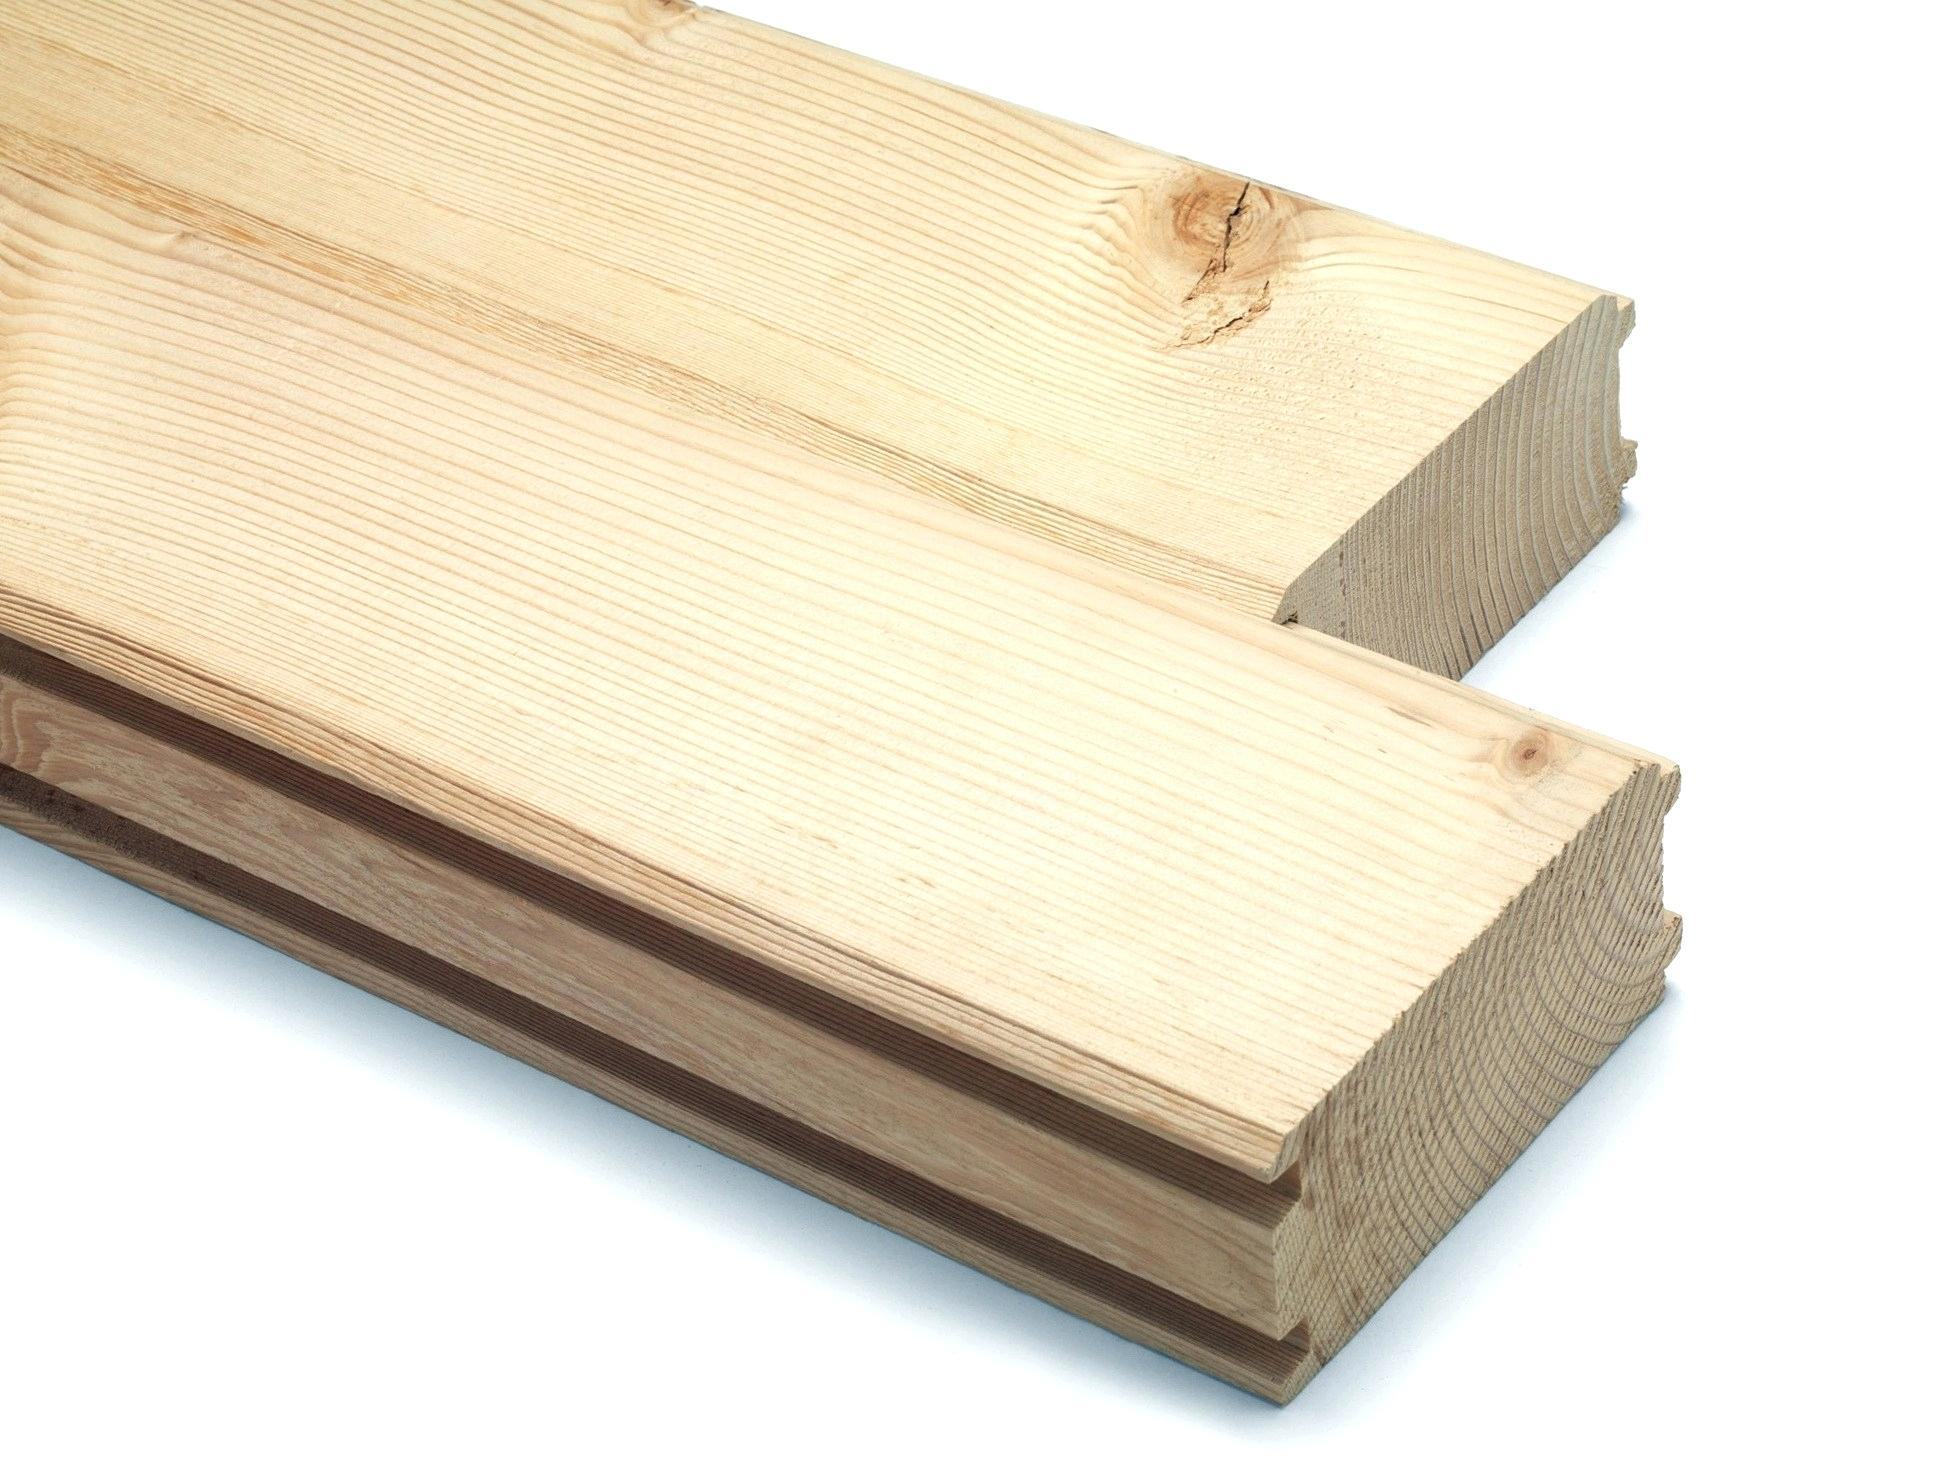 Tongue And Groove Roof Decking Batuhanclub in dimensions 1936 X 1463